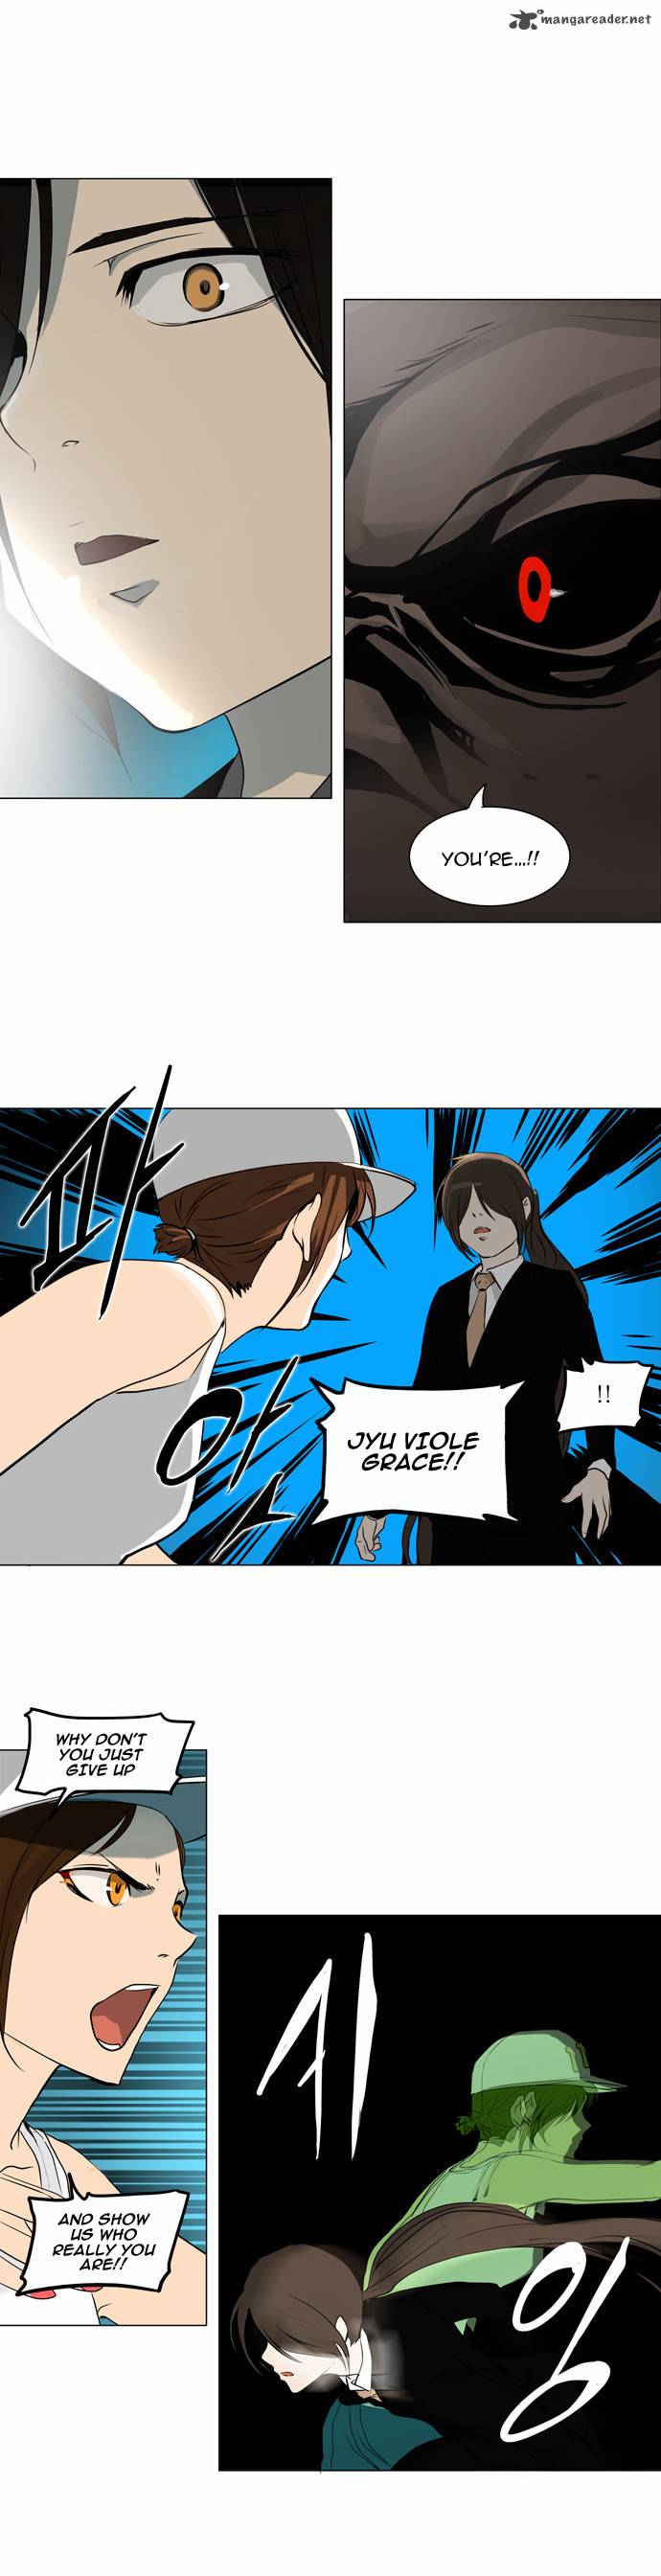 Tower Of God 160 2